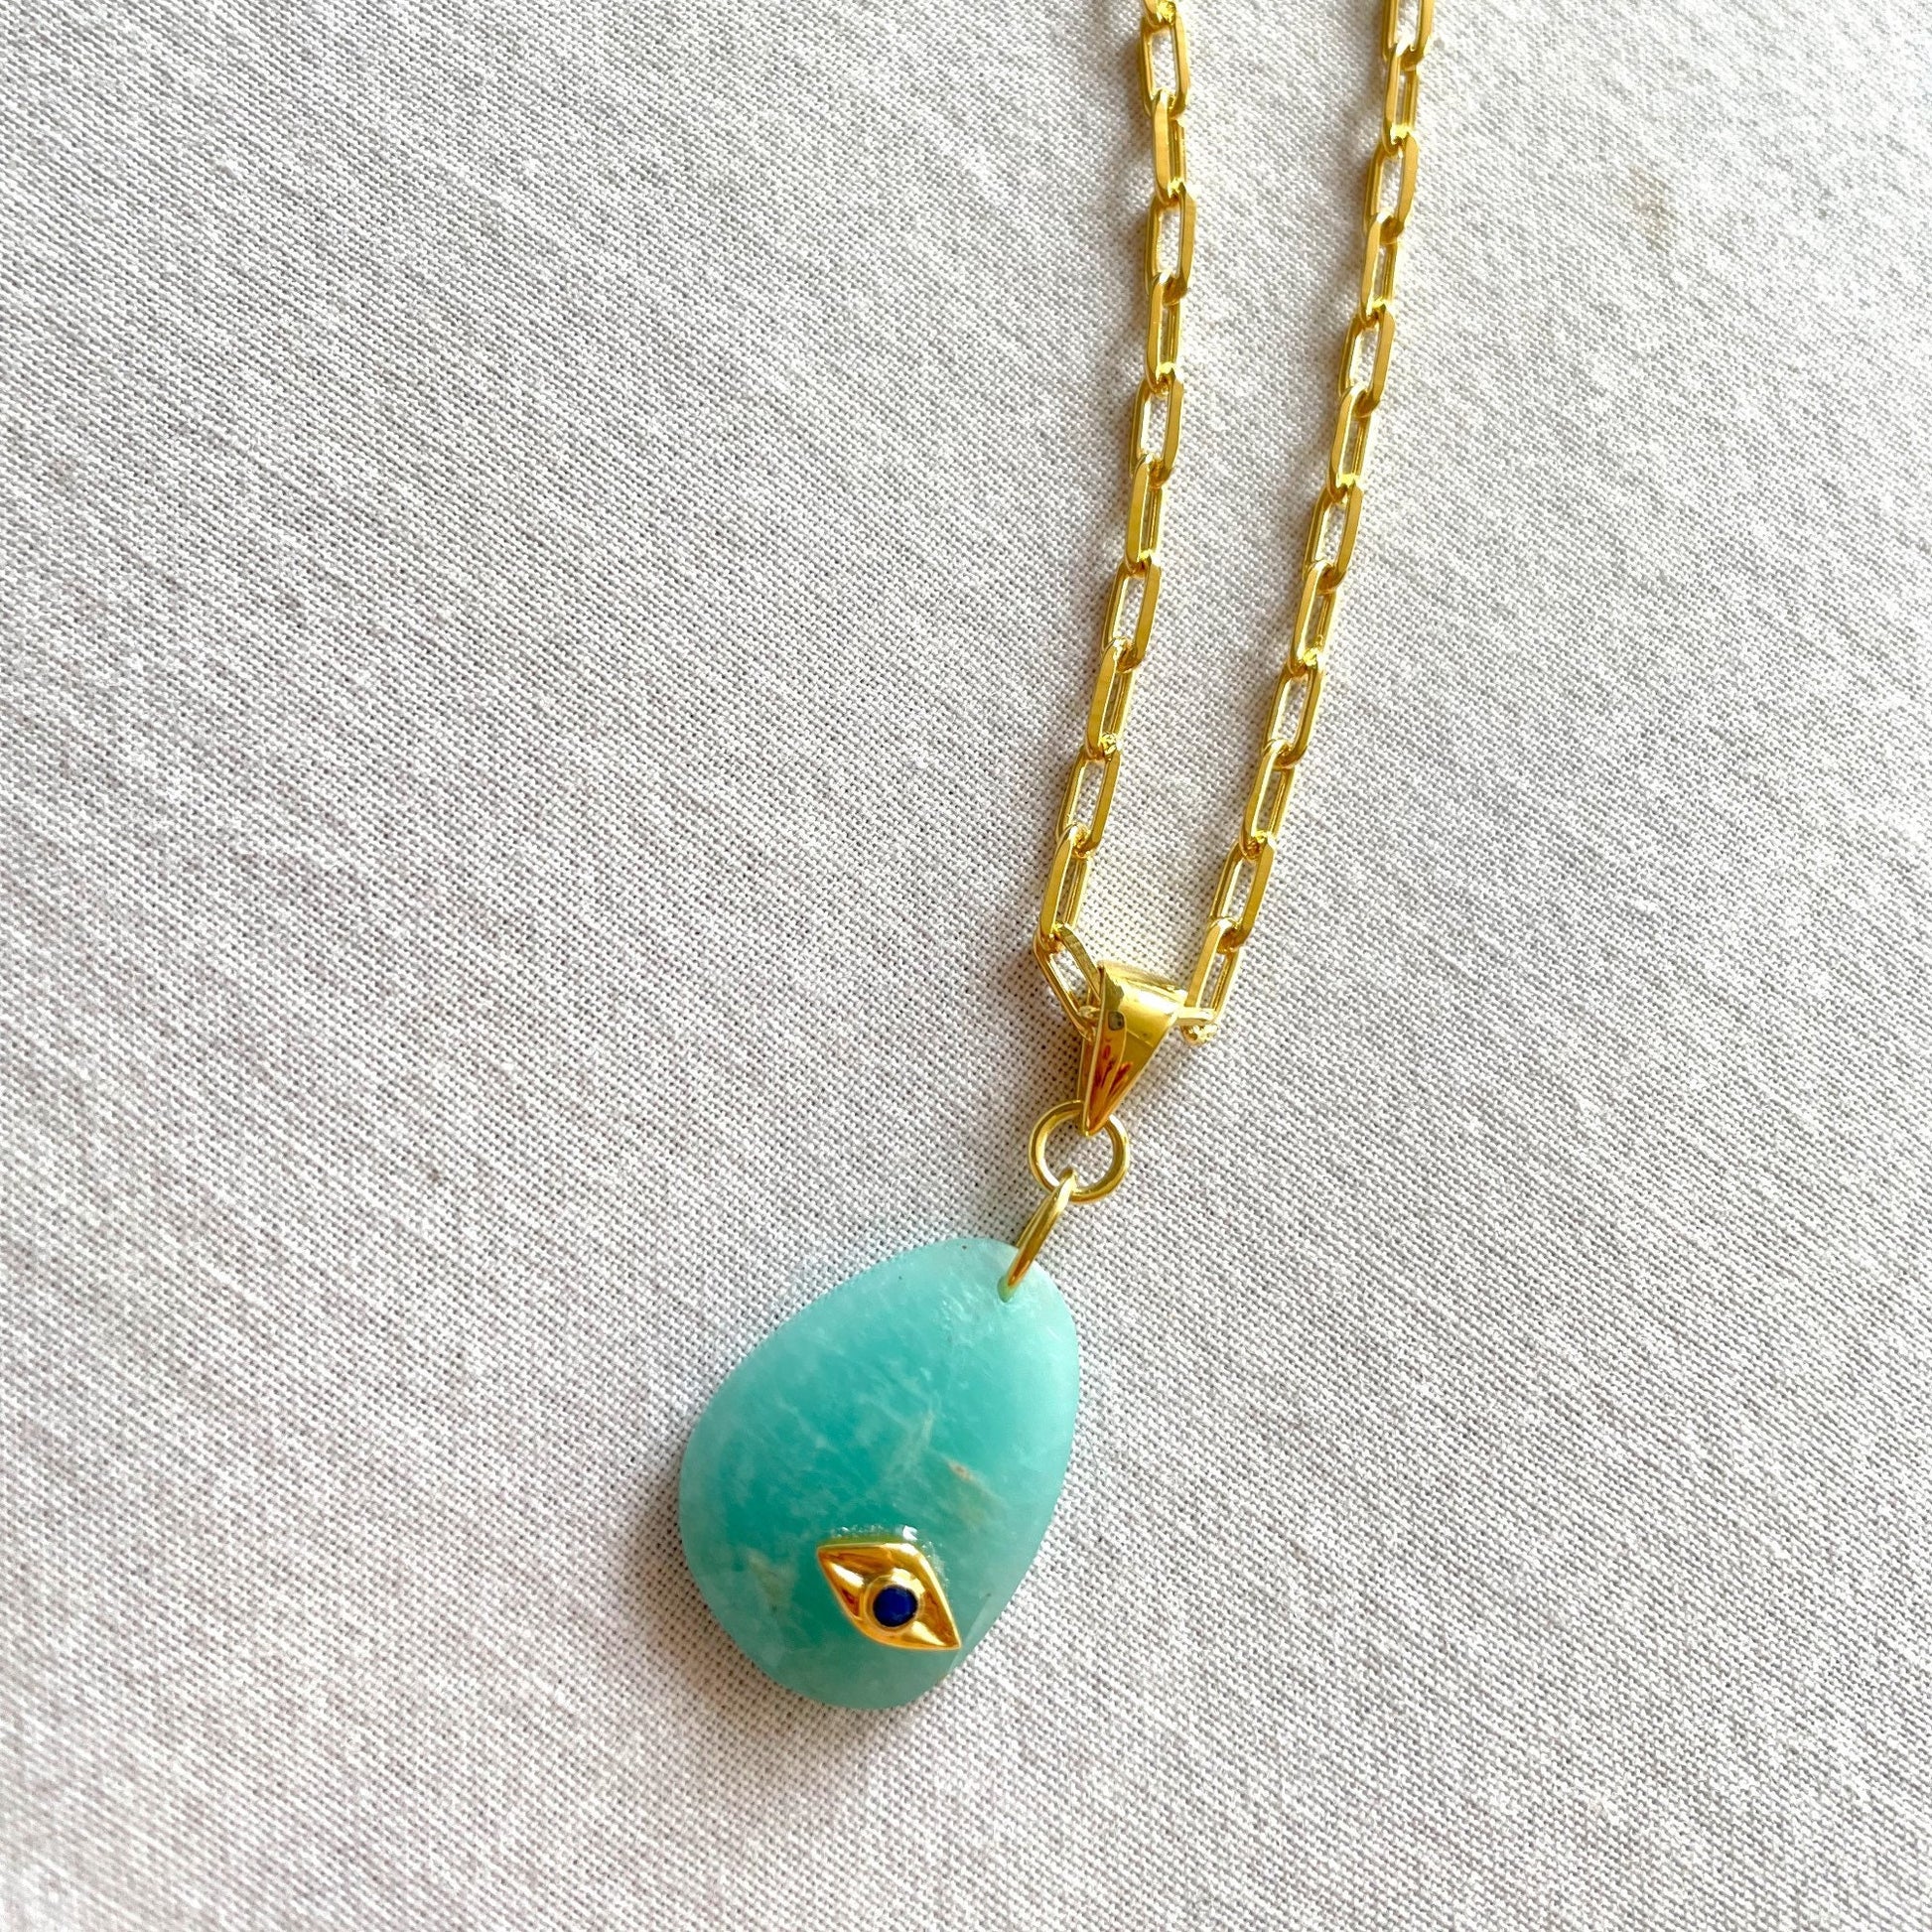 Amazonite Gold Pendant Necklace, Crystal Pendant Necklace, Gold Plated on 925 Sterling Silver, handmade gemstone necklace, Unique Gift, Evil eye necklace, gemstones, gold chain, Crystal, mothers day gift, small business, london, dainty necklace, gem